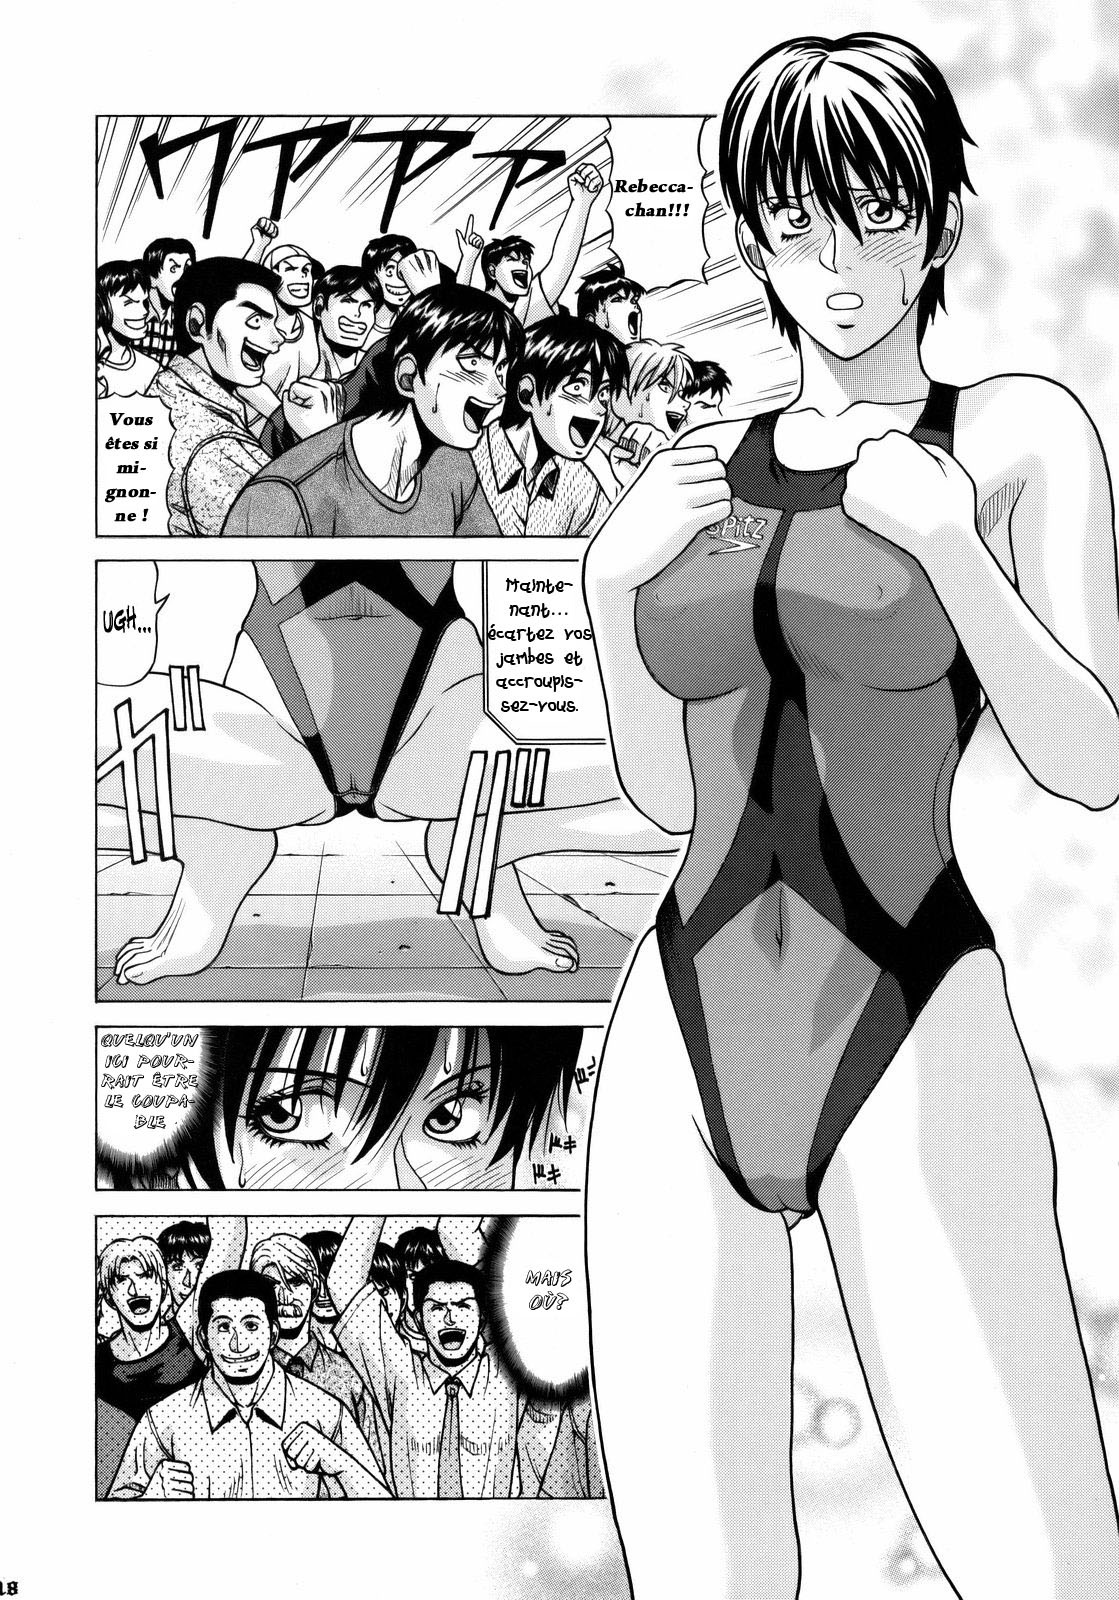 (C75) [Human High-Light Film (Jacky Knee-san)] Rebecca Chambers (Resident Evil) [French] page 17 full